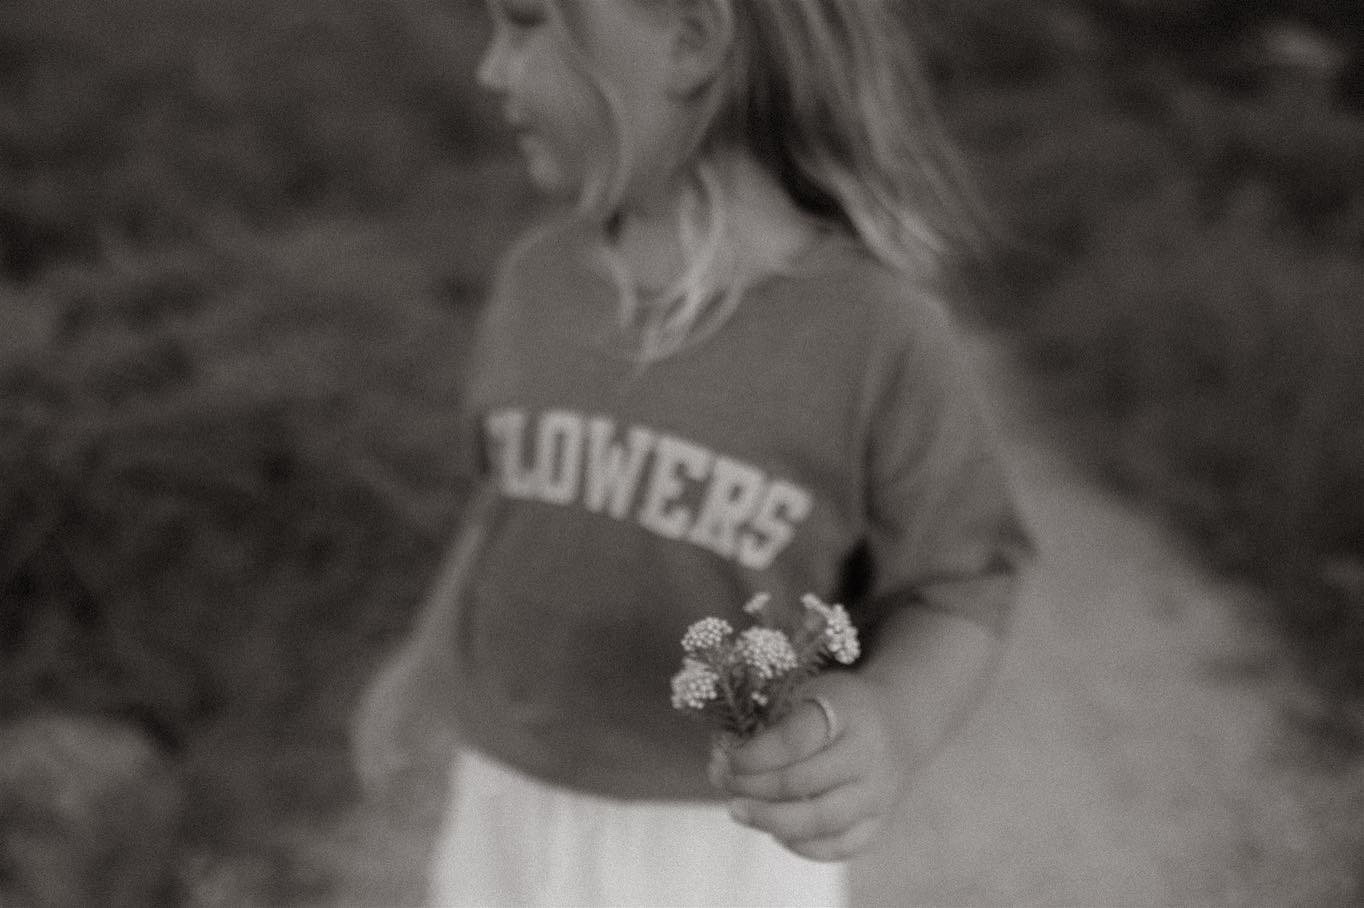 I love black and whites - there&rsquo;s something magical about them.

by the end of this sweet session, my pockets were full of freshly picked wildflowers gifted to me by my new little friends ❊